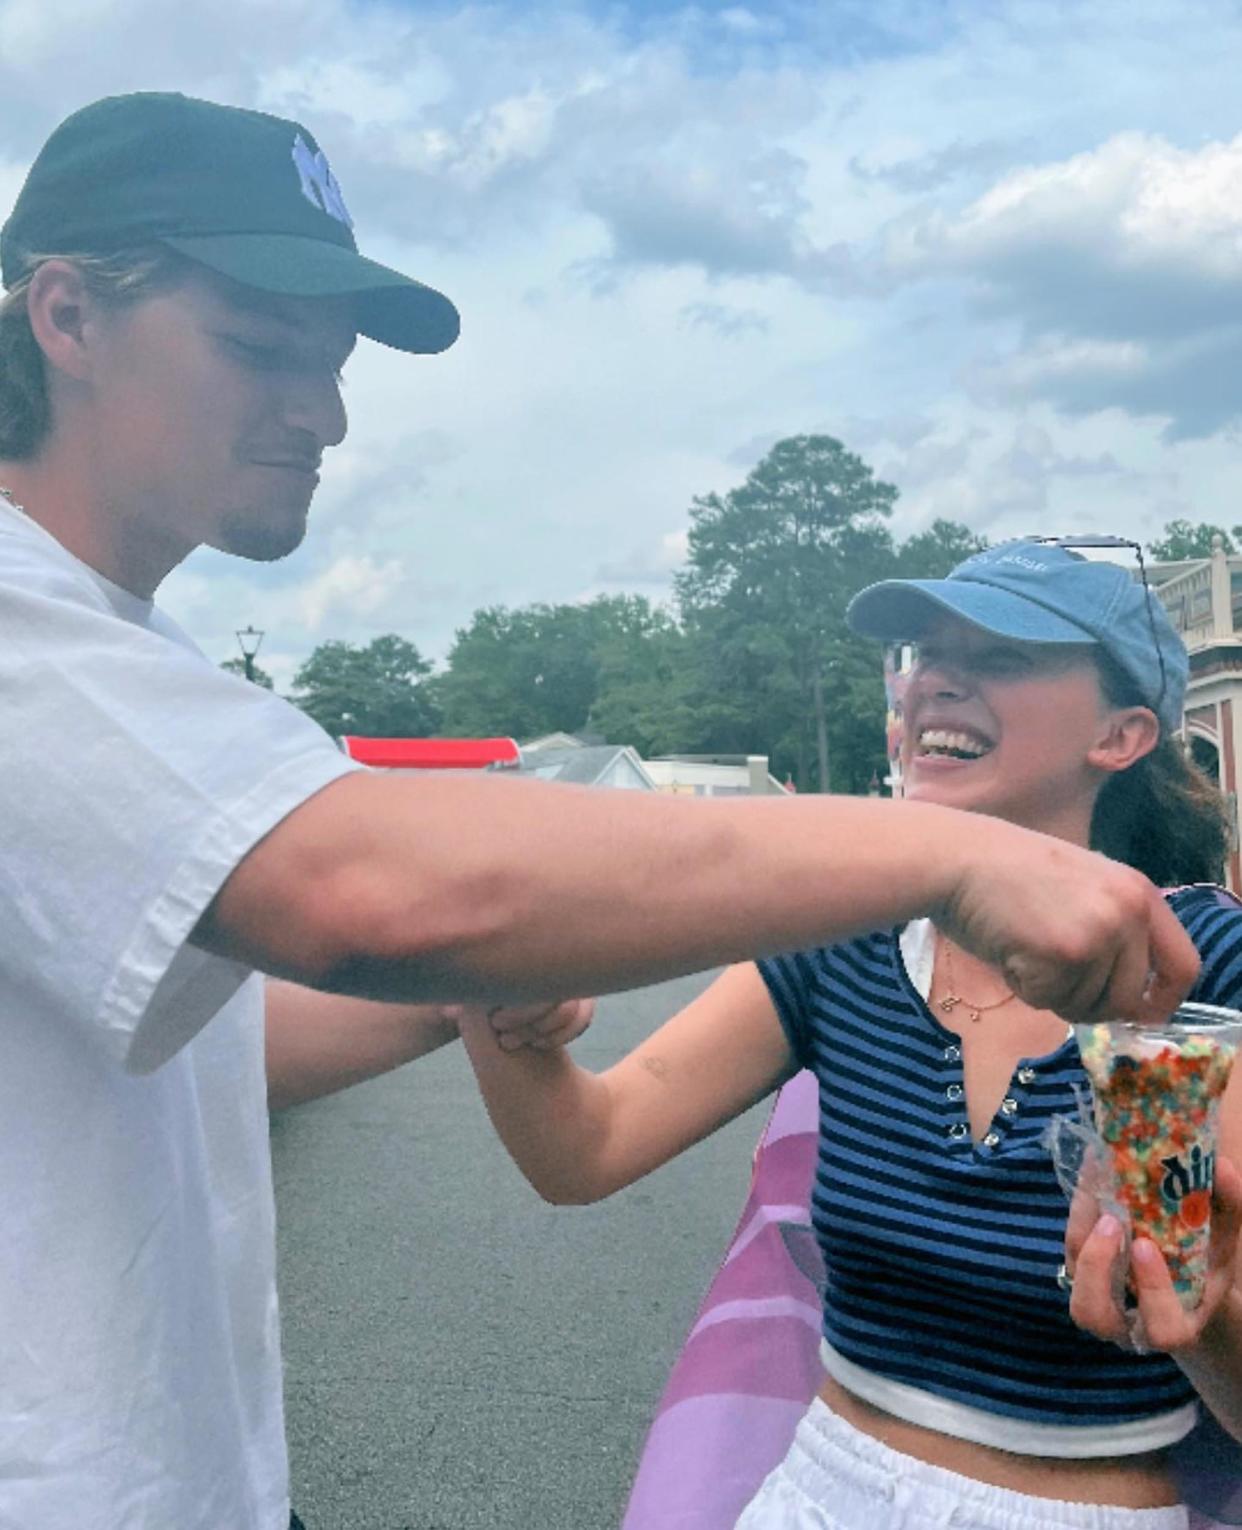 Bongiovi attempting to grab some of the actor's ice cream. (@milliebobbybrown via Instagram)